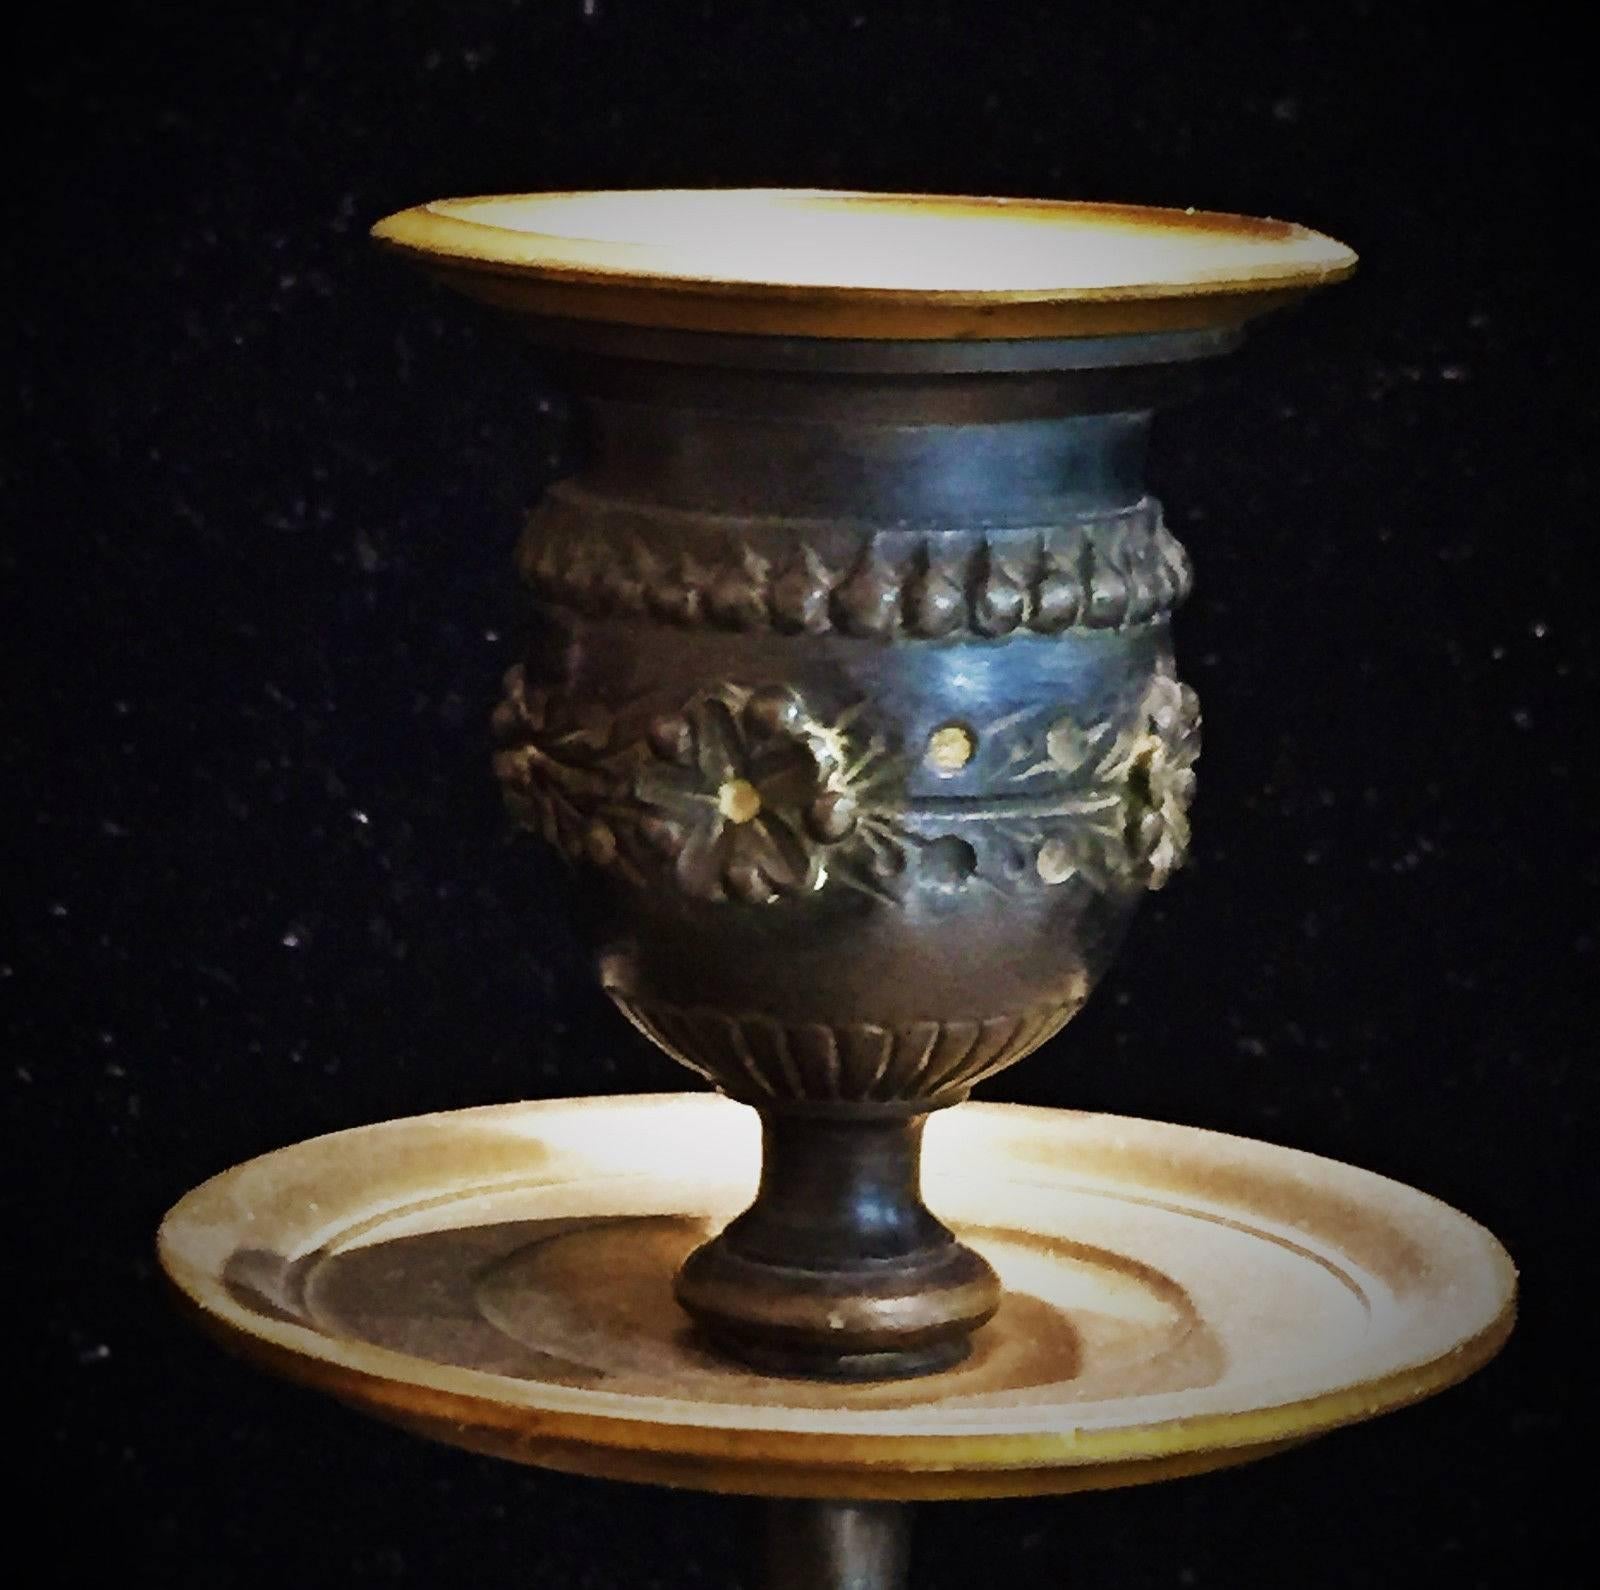 These 19th century candleholders are a fine example of the style that was domineering in the applied arts during Napoleon III reign in France i.e. Second French Empire - the period between the Second and the Third Republic. The Bonapartist regime of